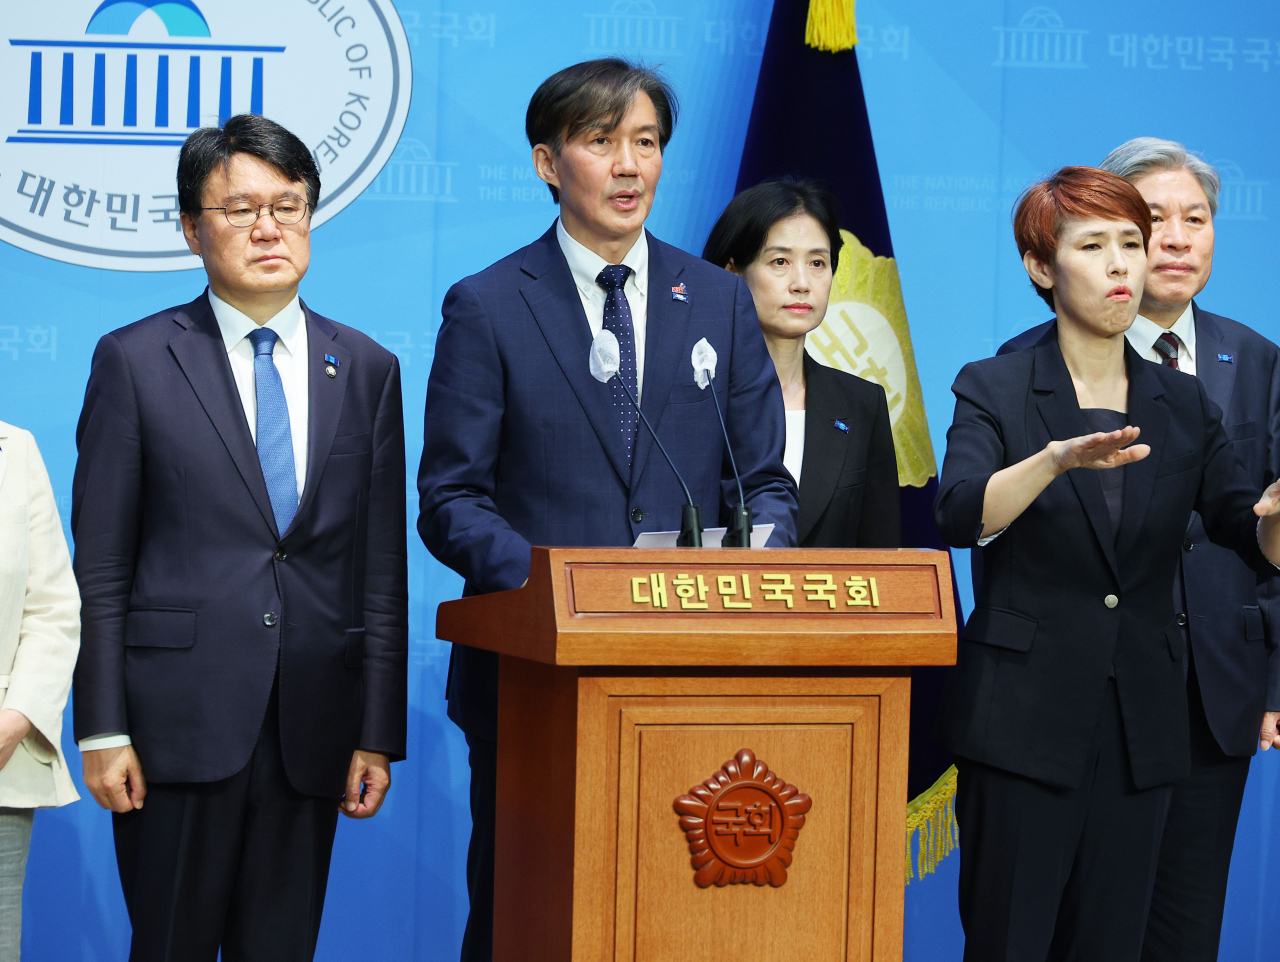 Cho Kuk, leader of the minor opposition Rebuilding Korea Party, speaks during a press briefing held at the National Assembly in Seoul on Friday. (Yonhap)